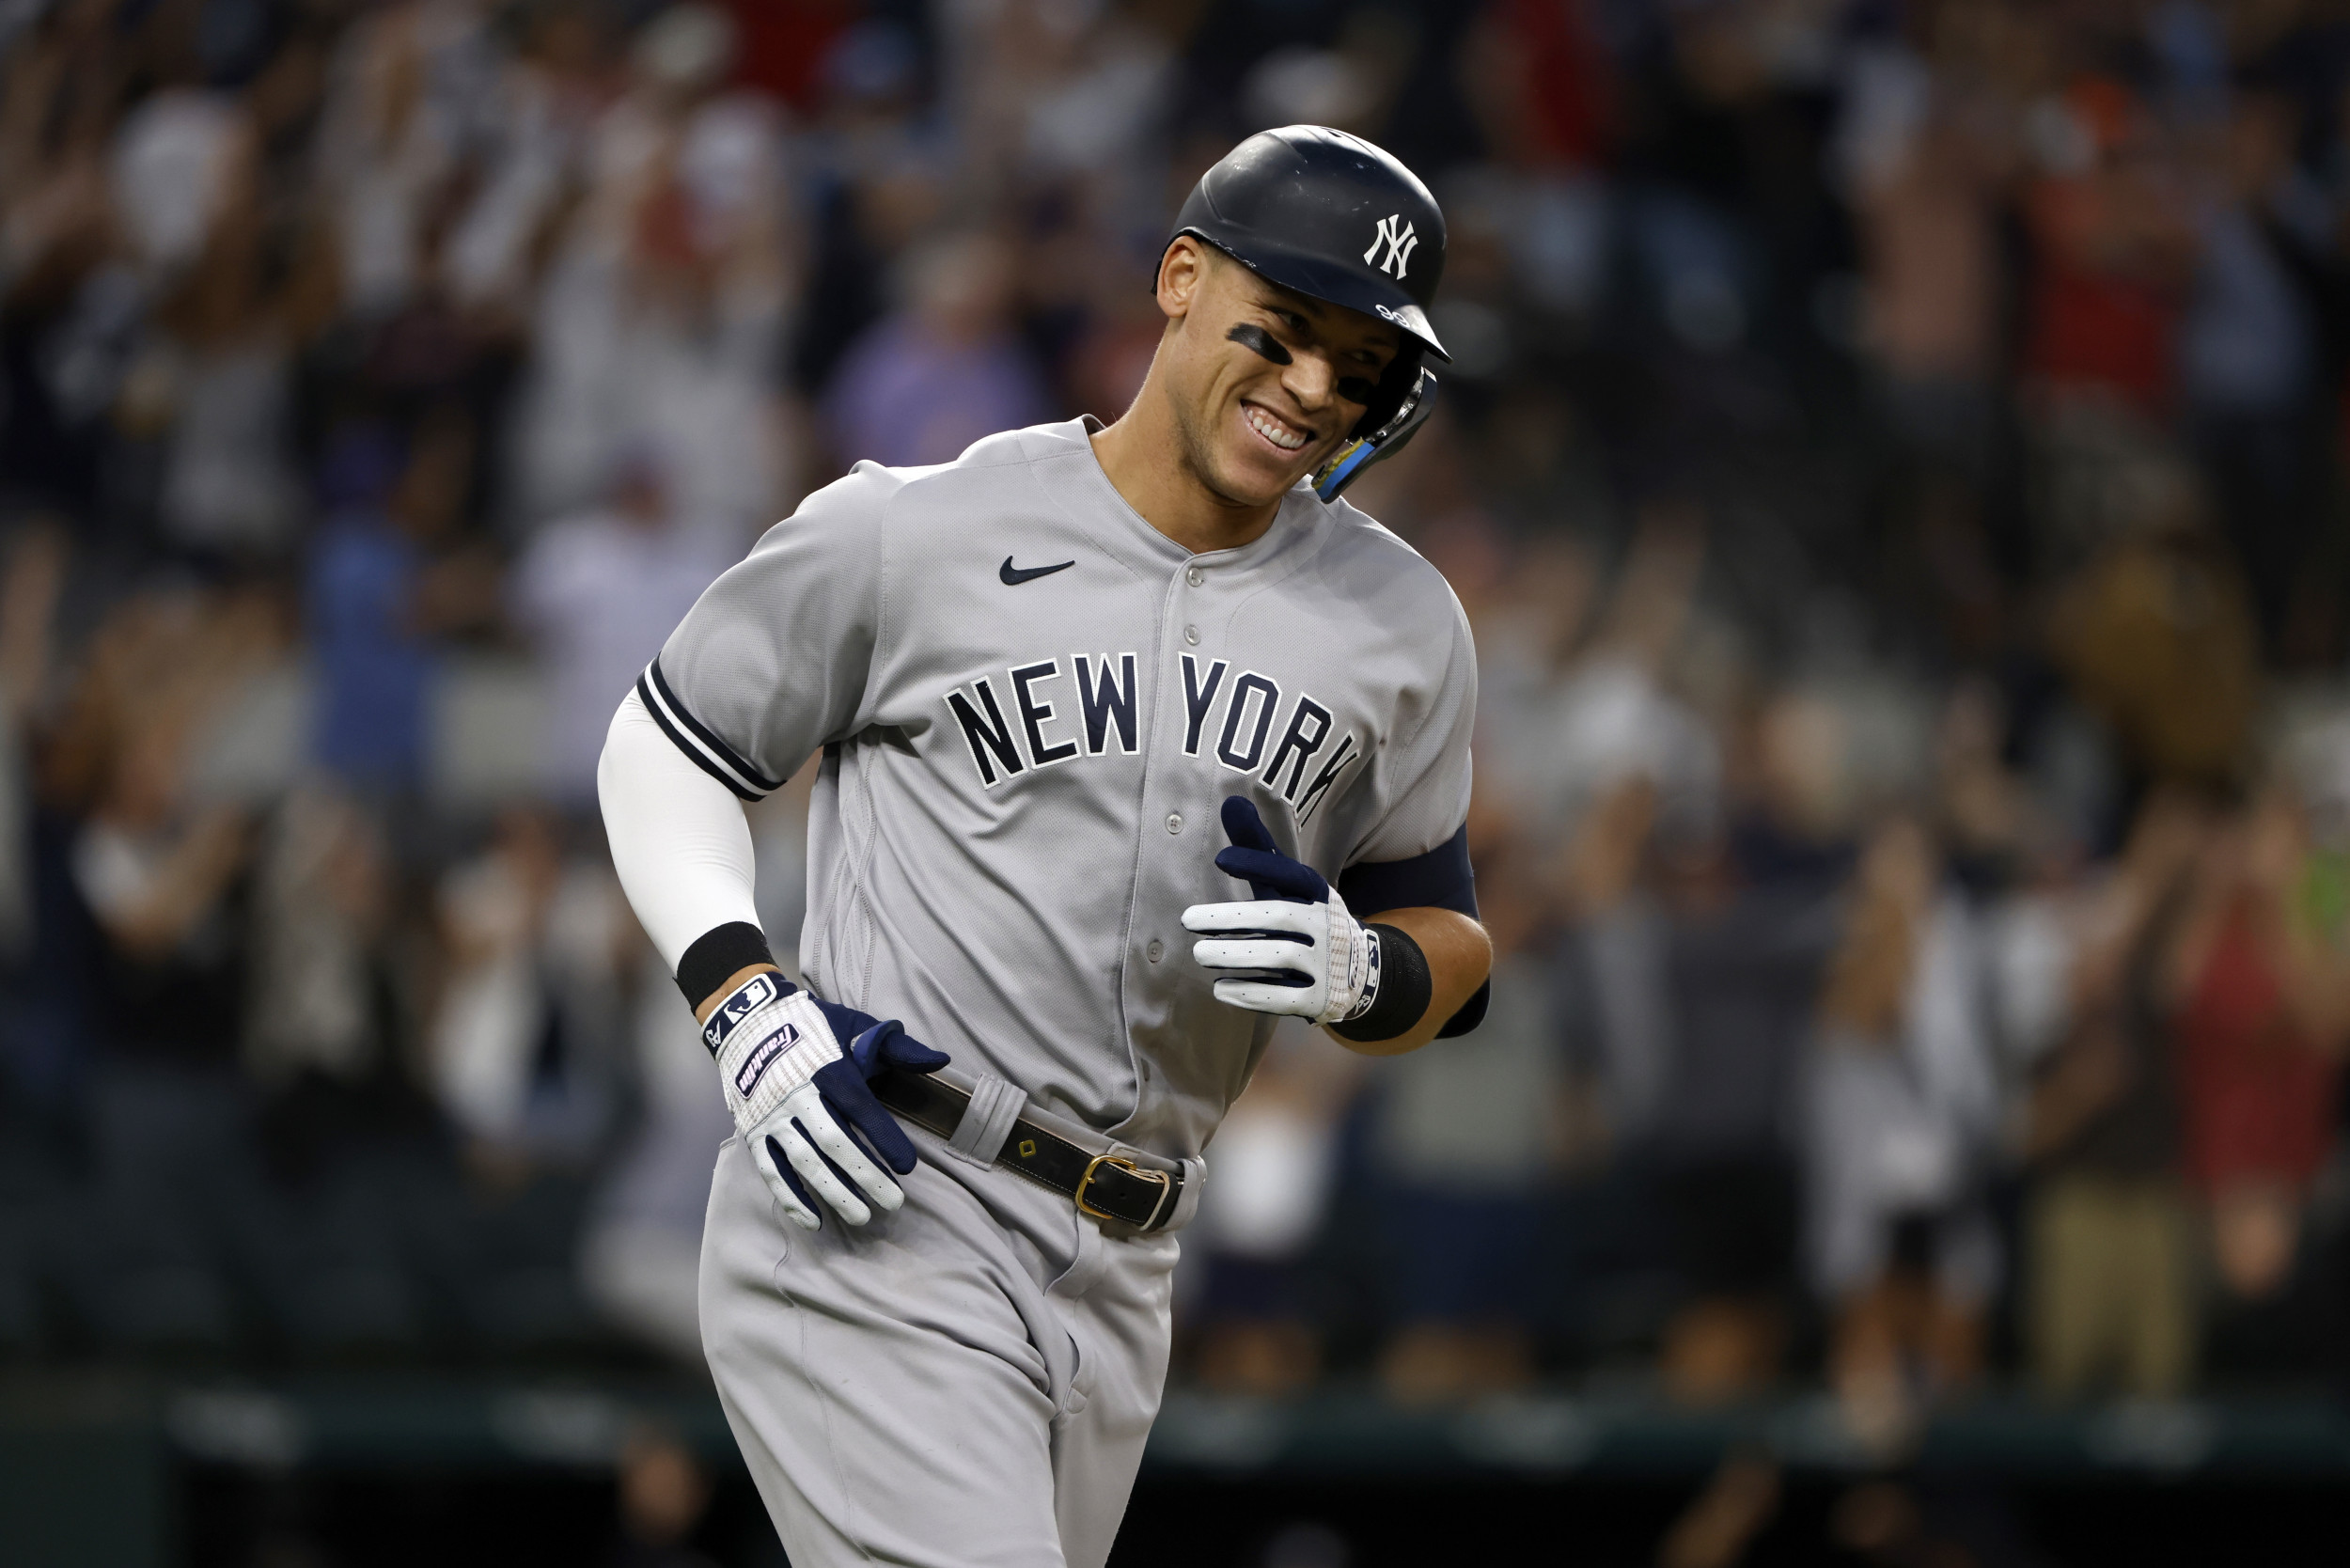 Aaron Judge Hit 62 Home Runs Will He Now Get a RecordBreaking Contract?